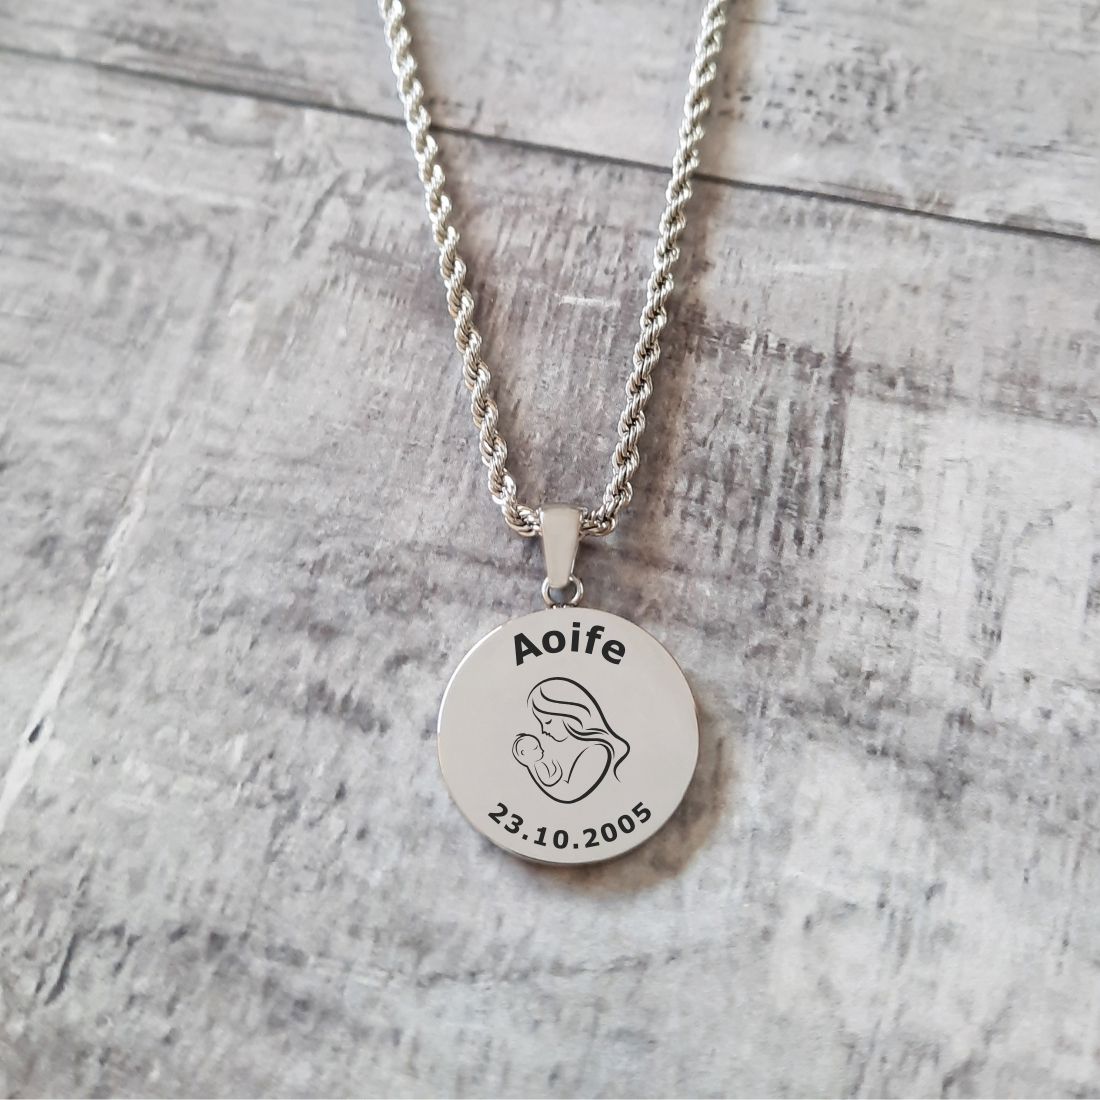 Personalised New Mother Necklace - Gift Idea For A New Mother